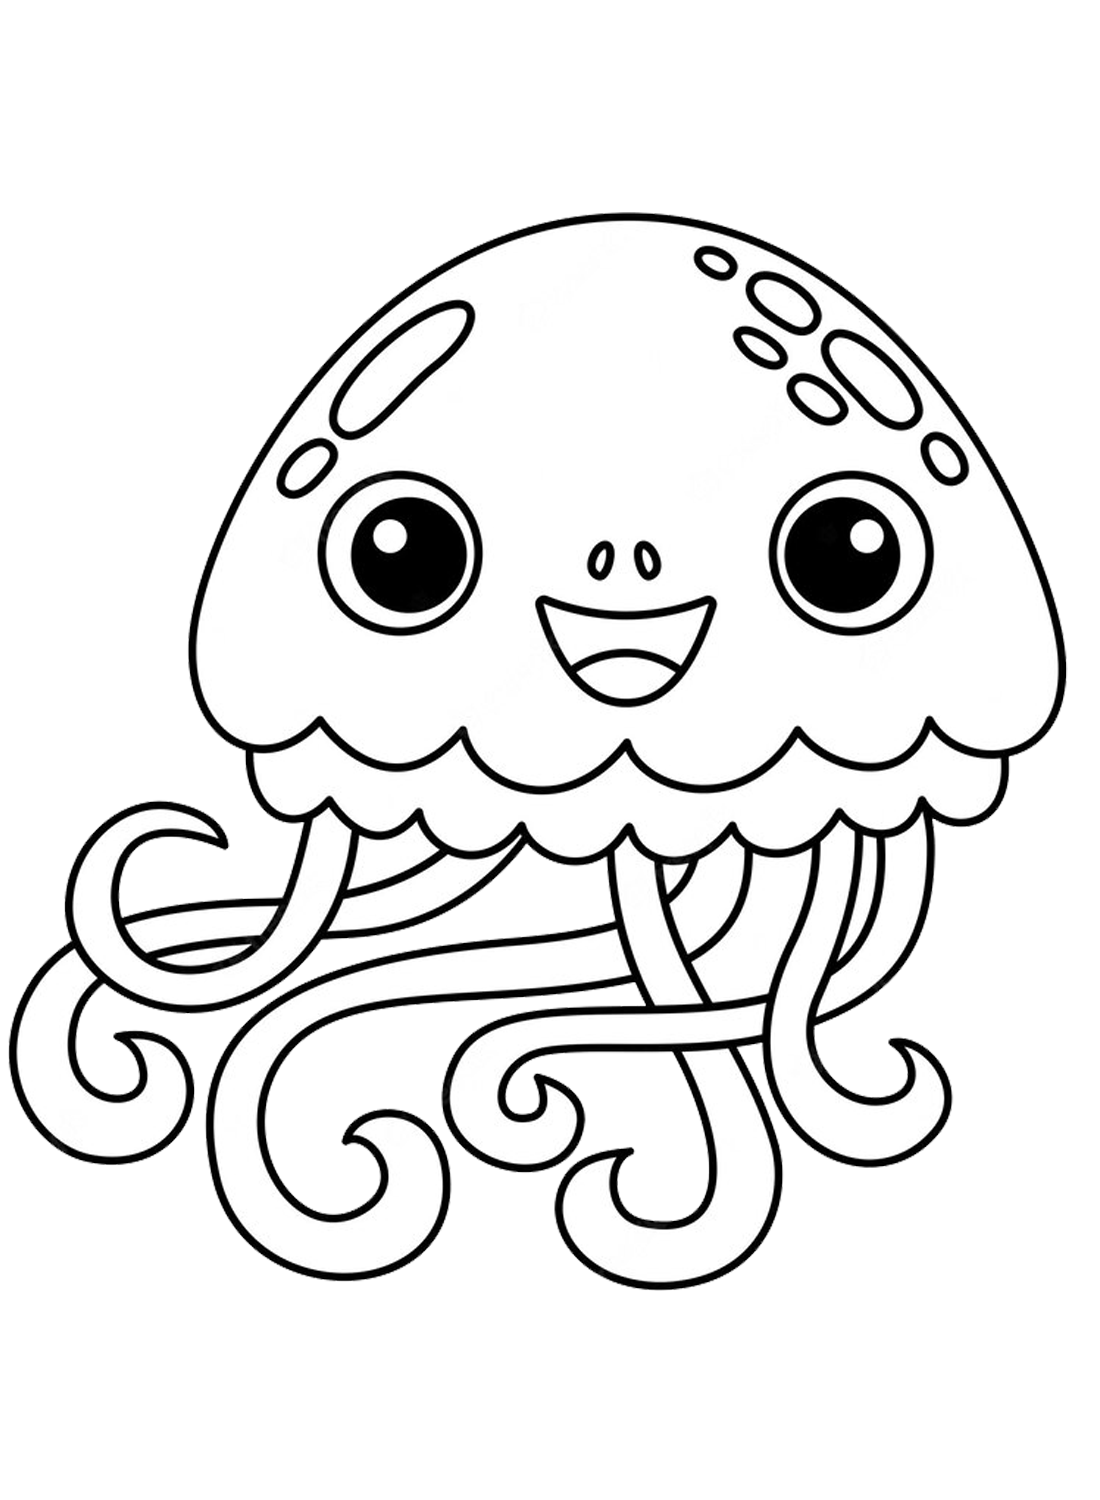 Cute jellyfish Coloring Page